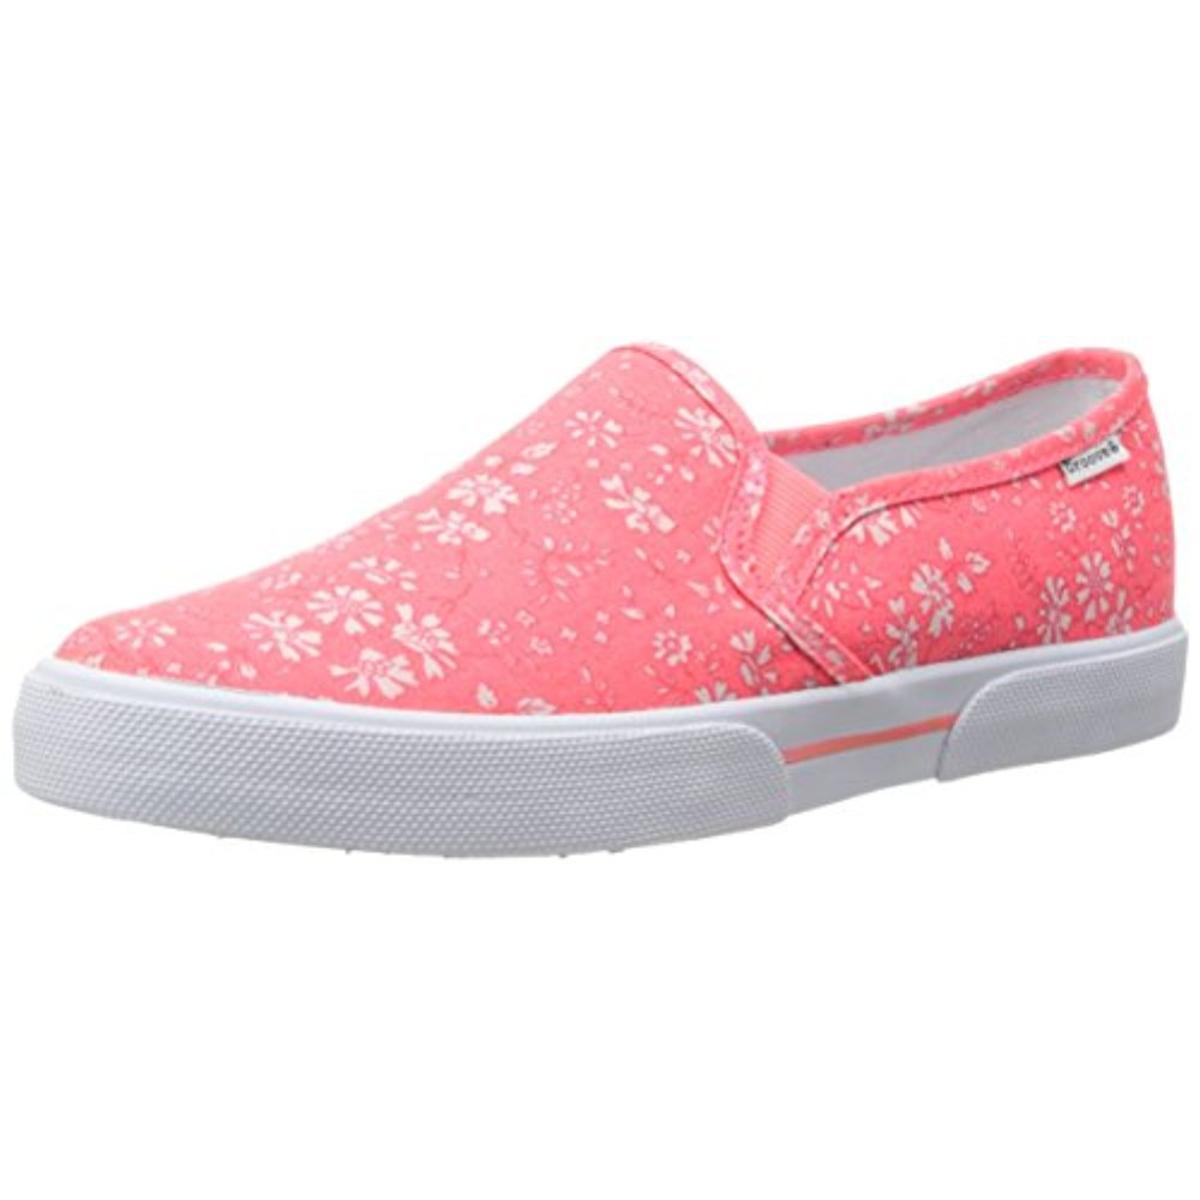 Groove 3258 Womens Genius Canvas Slip On Fashion Sneakers Shoes BHFO | eBay